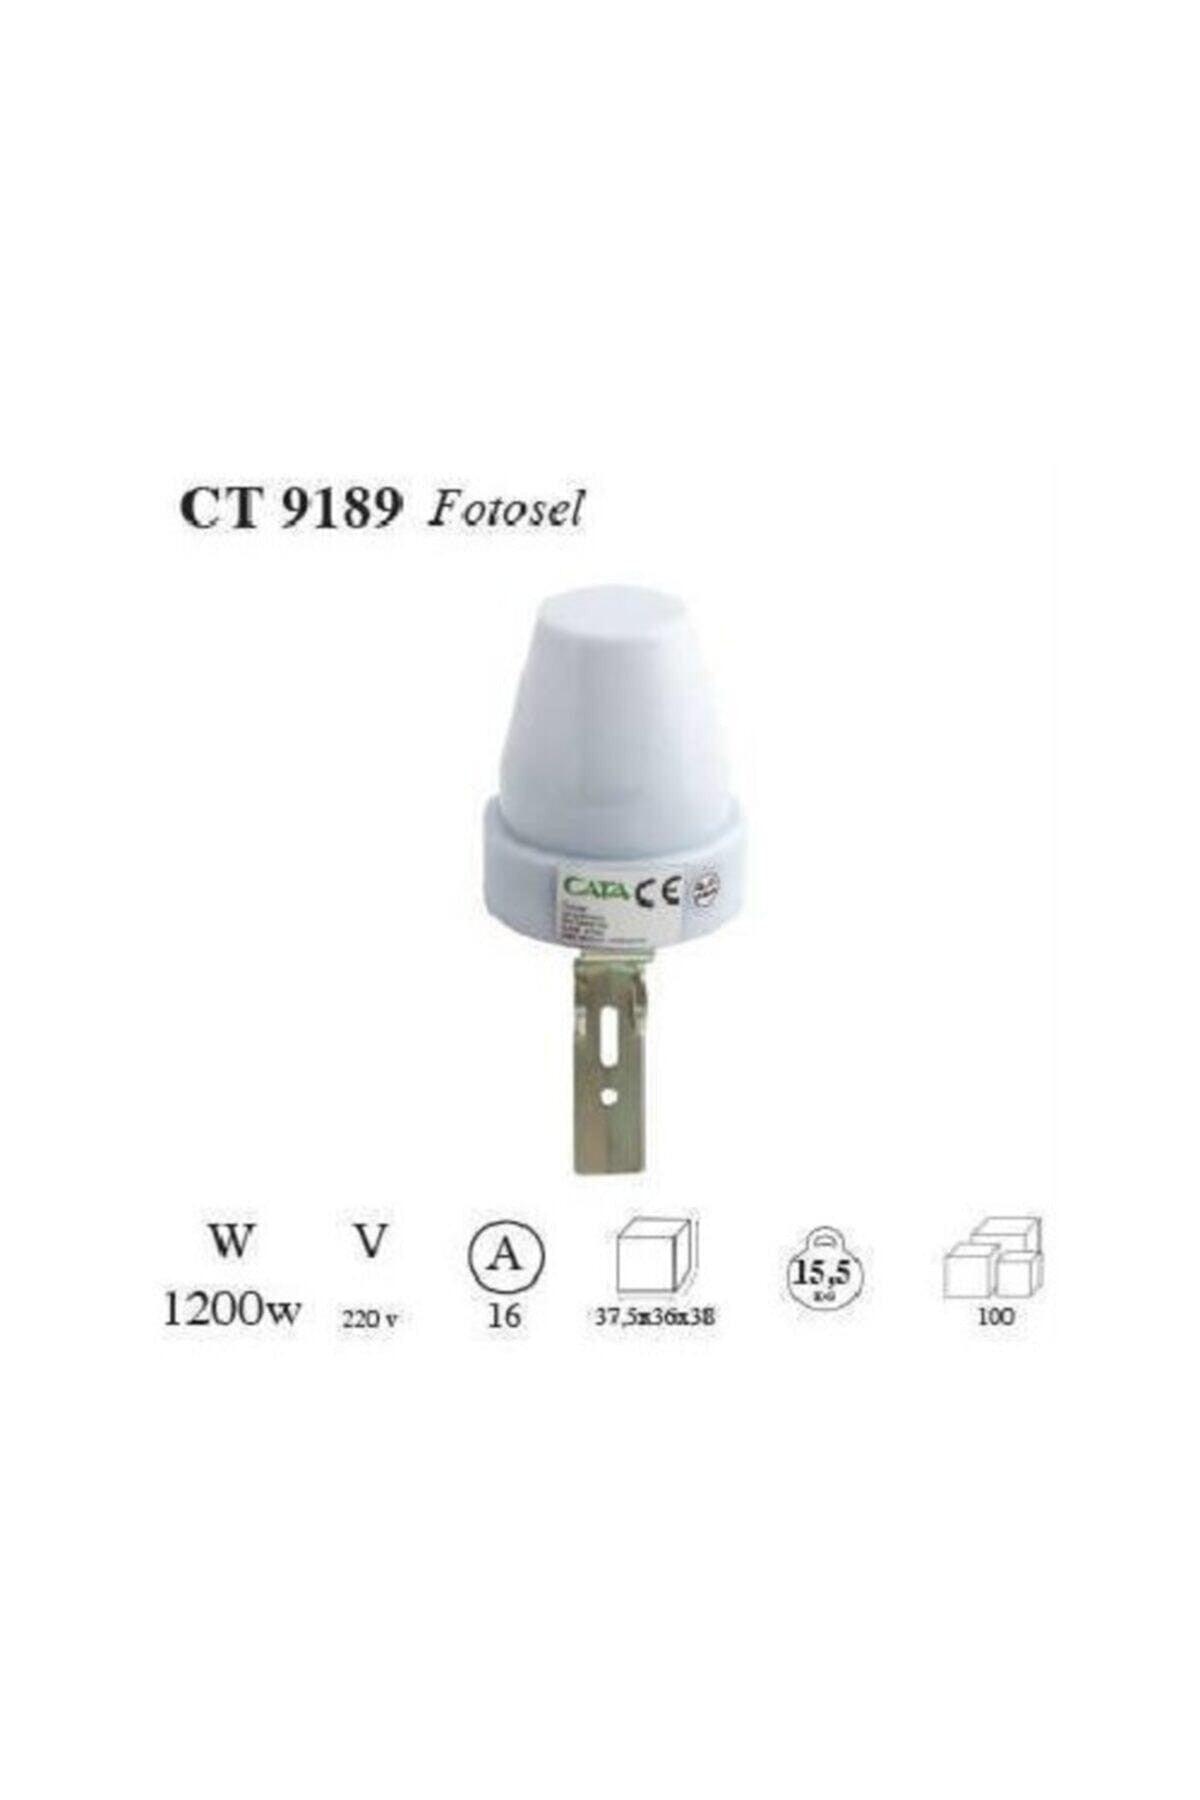 10 ct-9189 10a 1200w Photocell